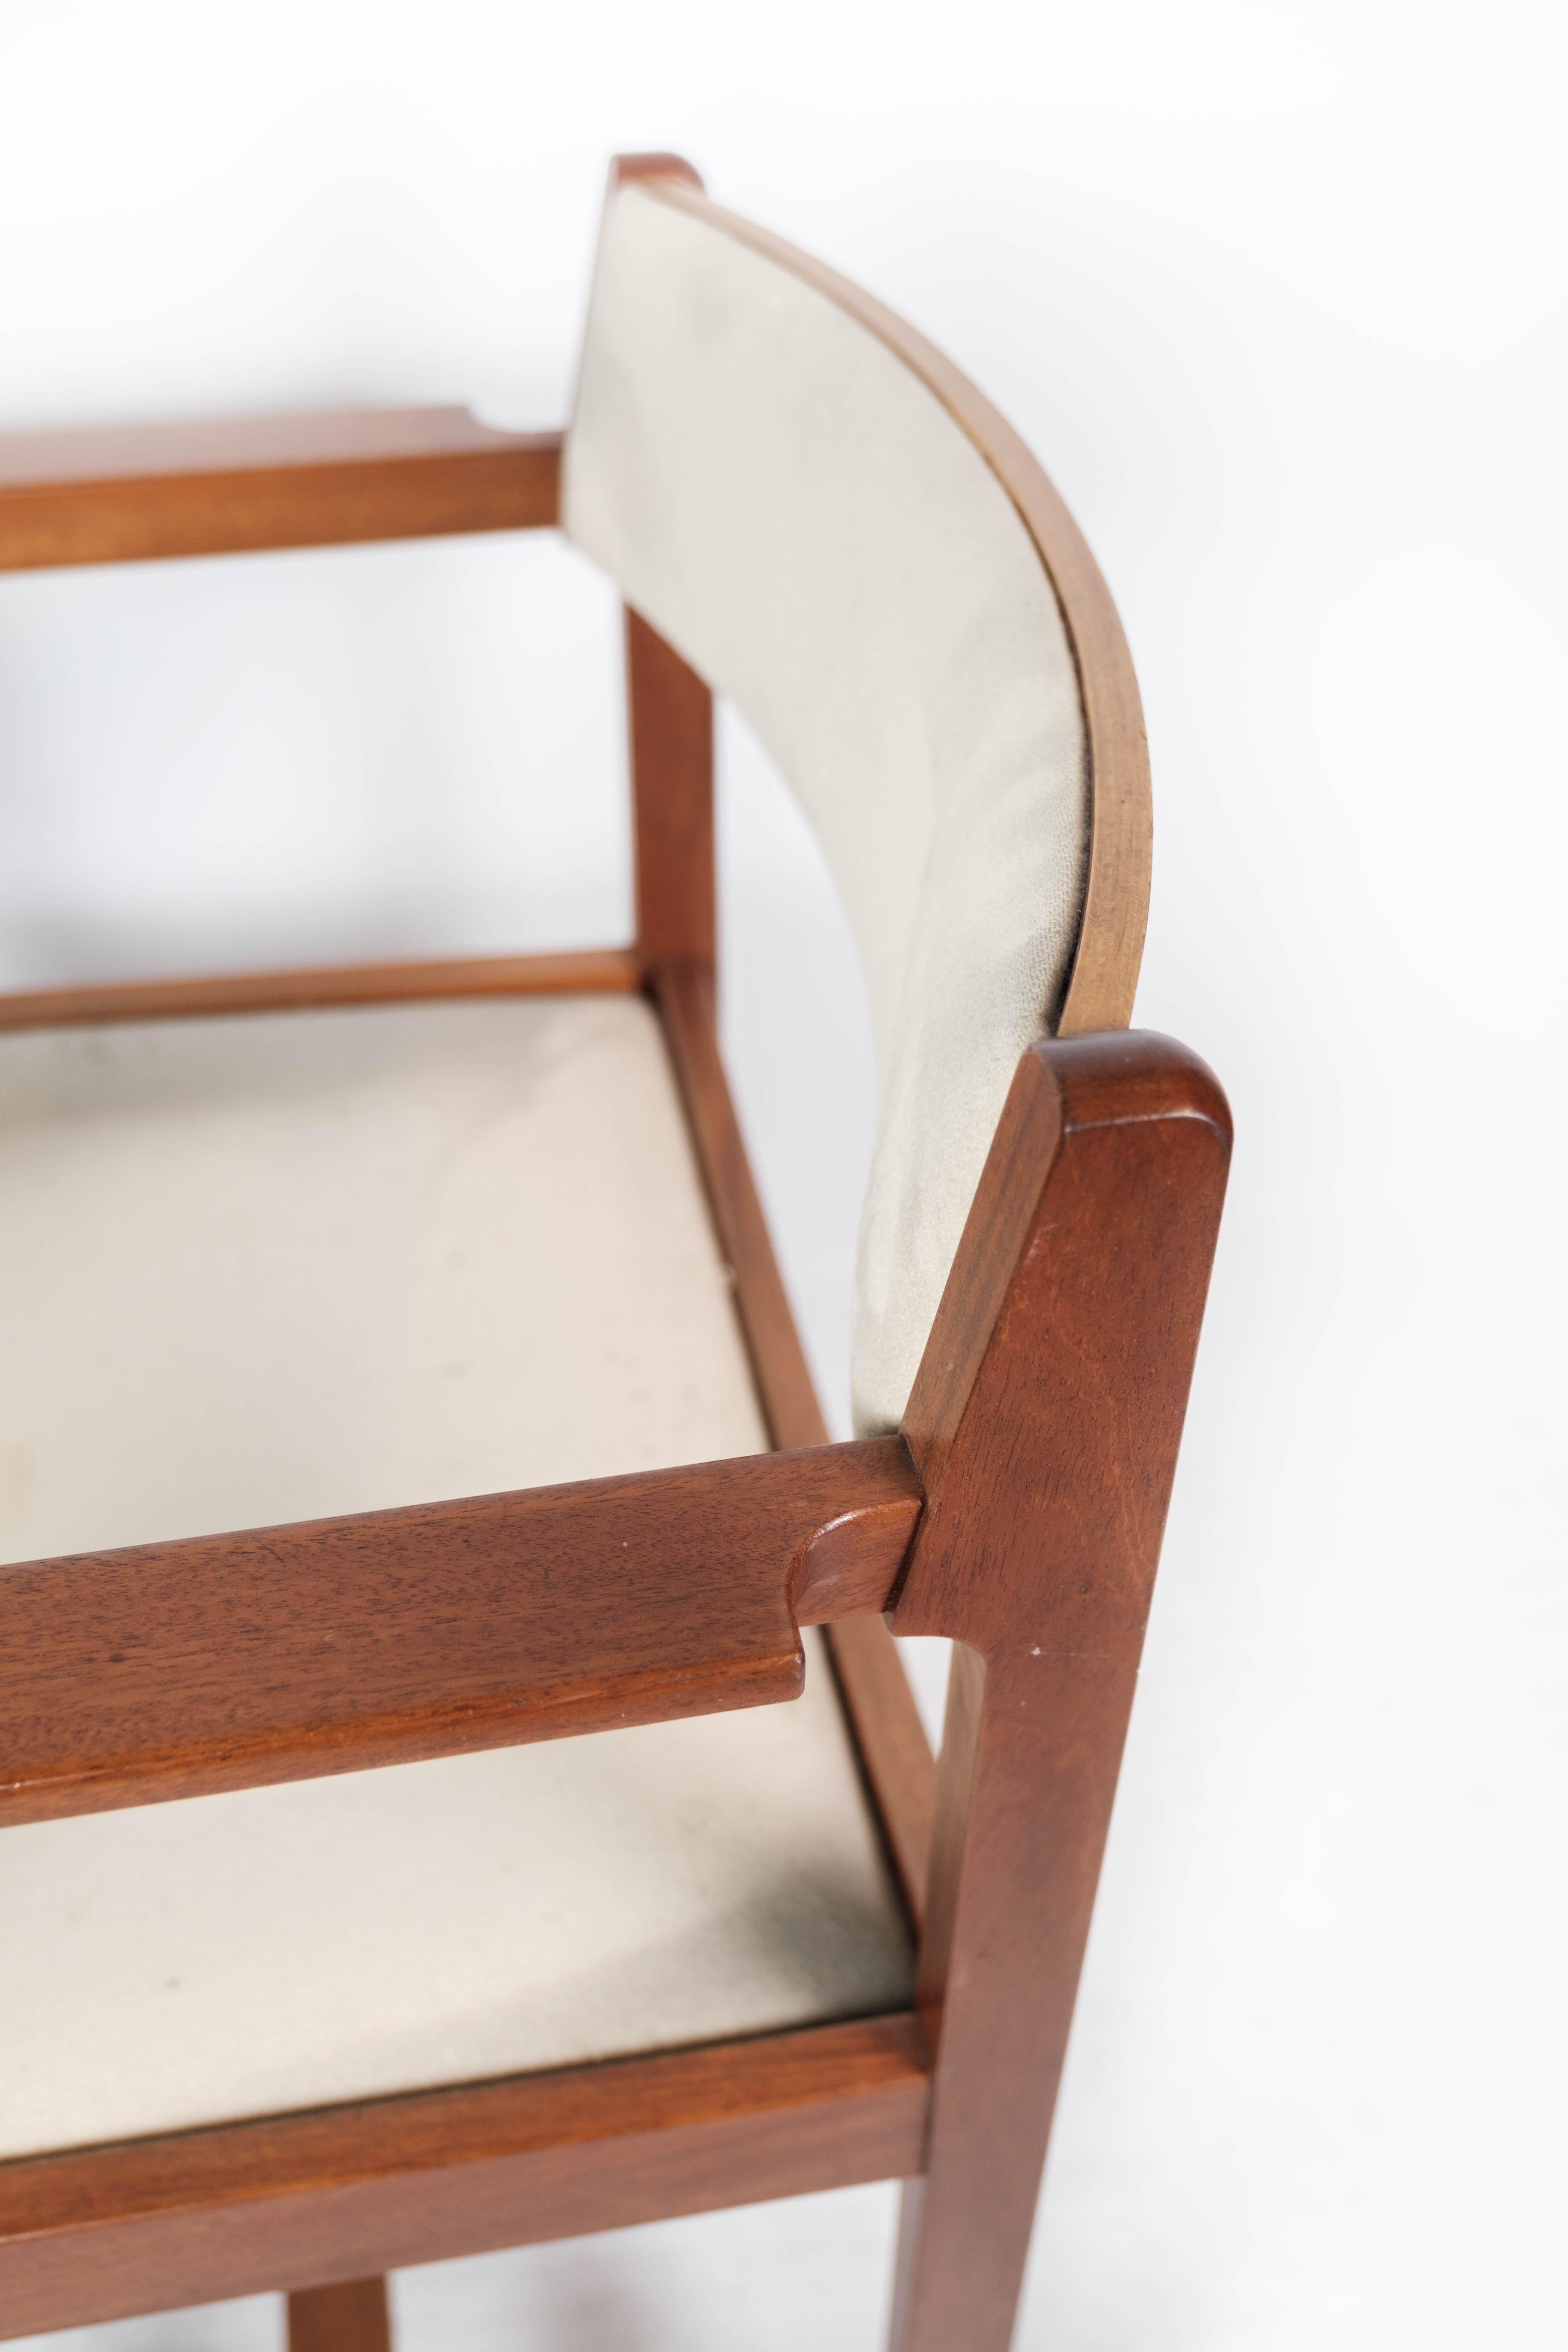 Armchair in Mahogany and Light Fabric of Danish Design by Søborg, 1960s In Good Condition For Sale In Lejre, DK